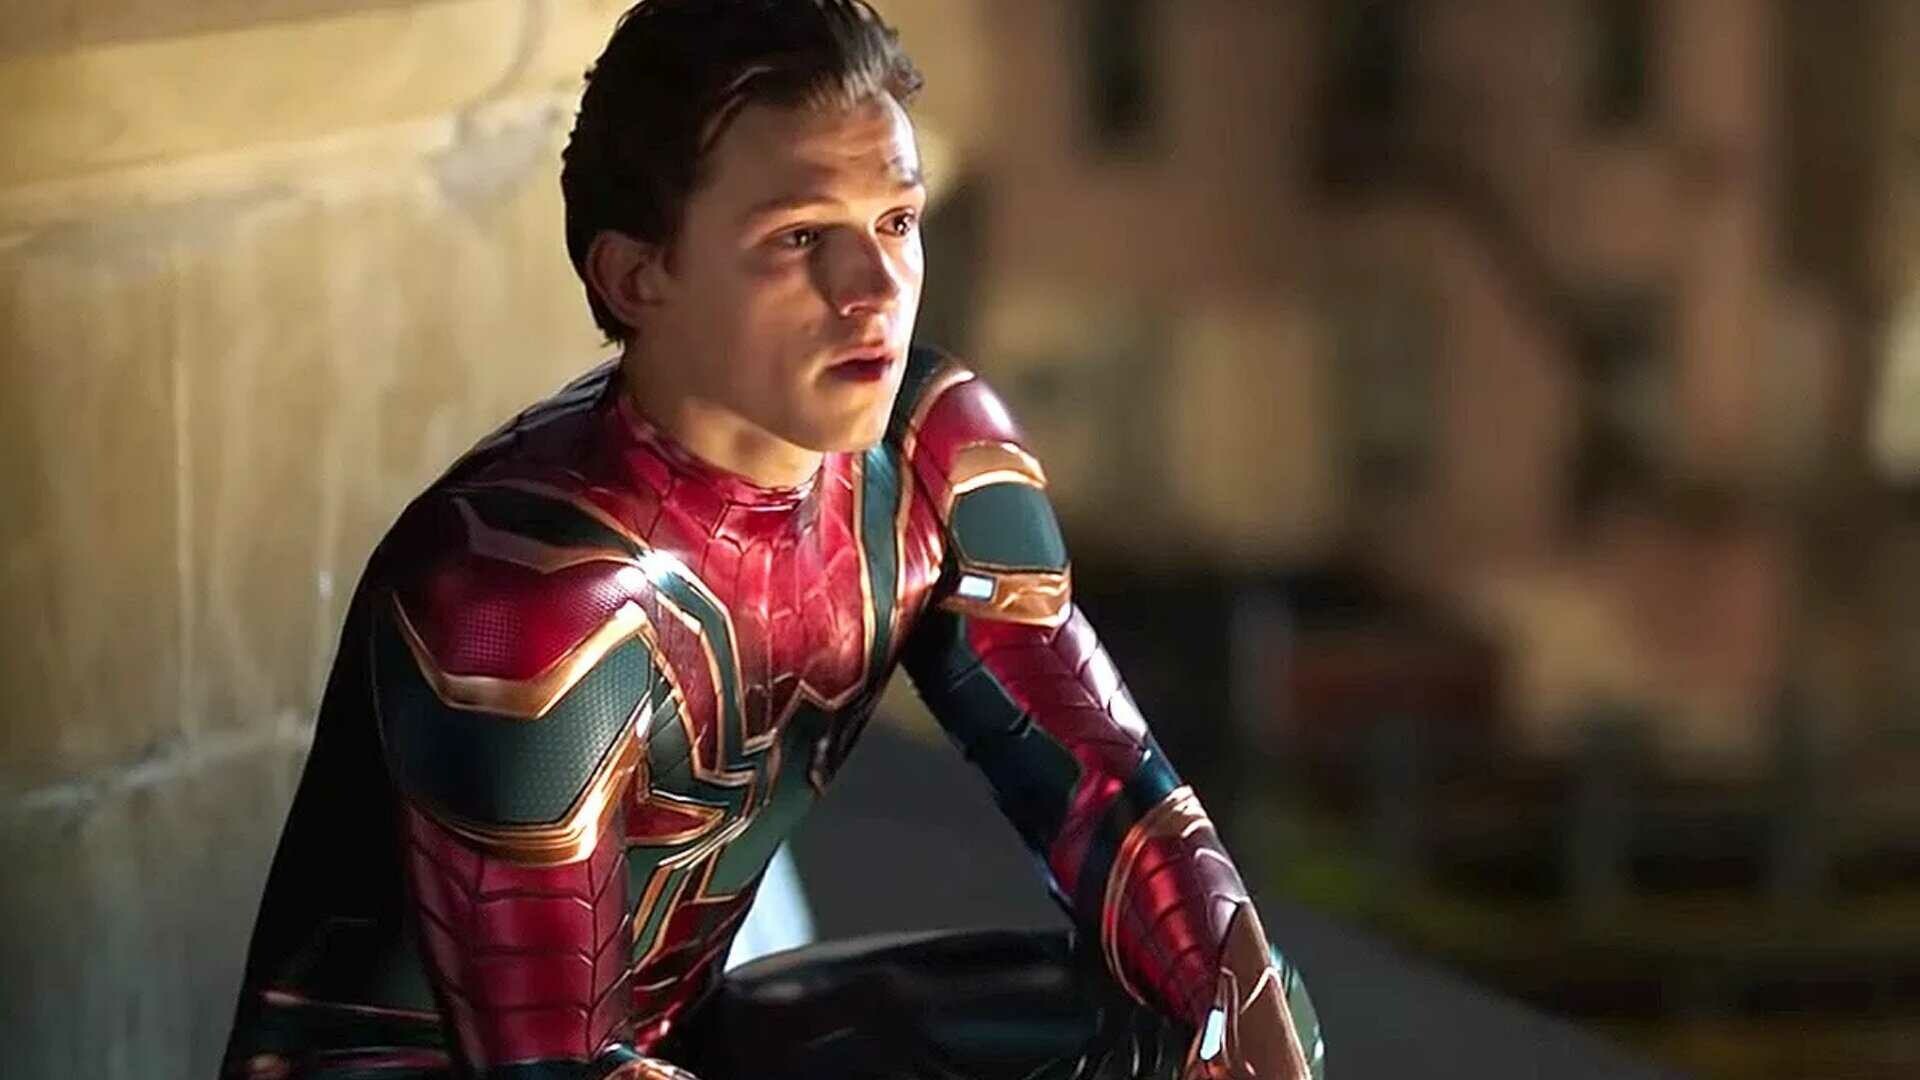 Tom Holland: Starred as Peter Parker in a 2019 American superhero film, Spider-Man: Far From Home. 1920x1080 Full HD Background.